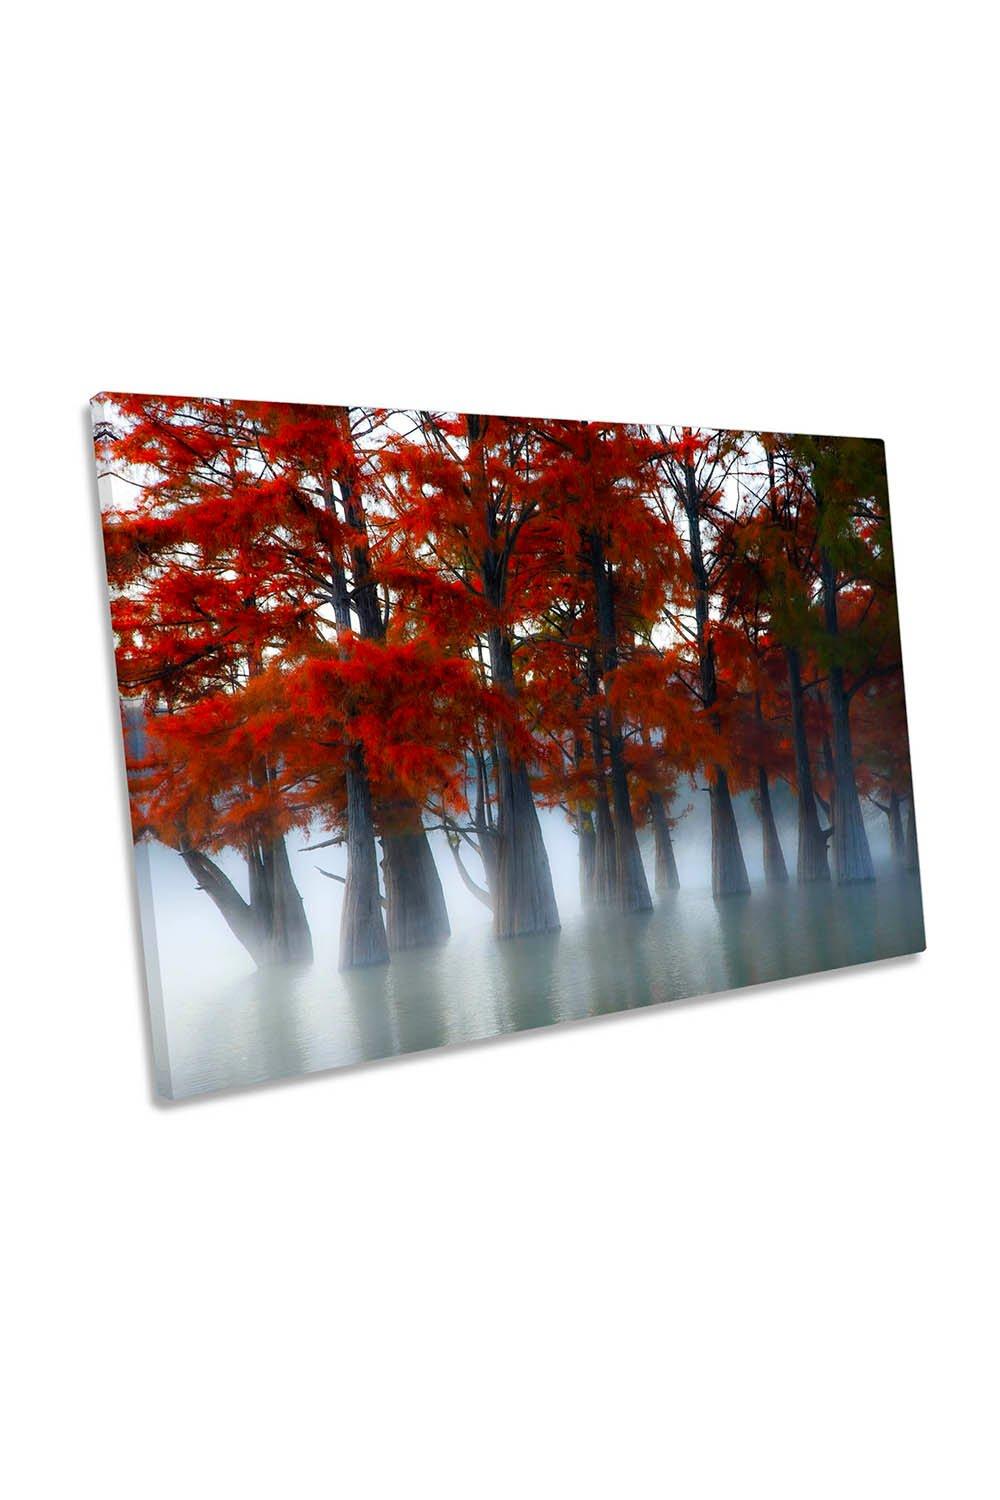 Cypress Red Trees Fog Mist Canvas Wall Art Picture Print